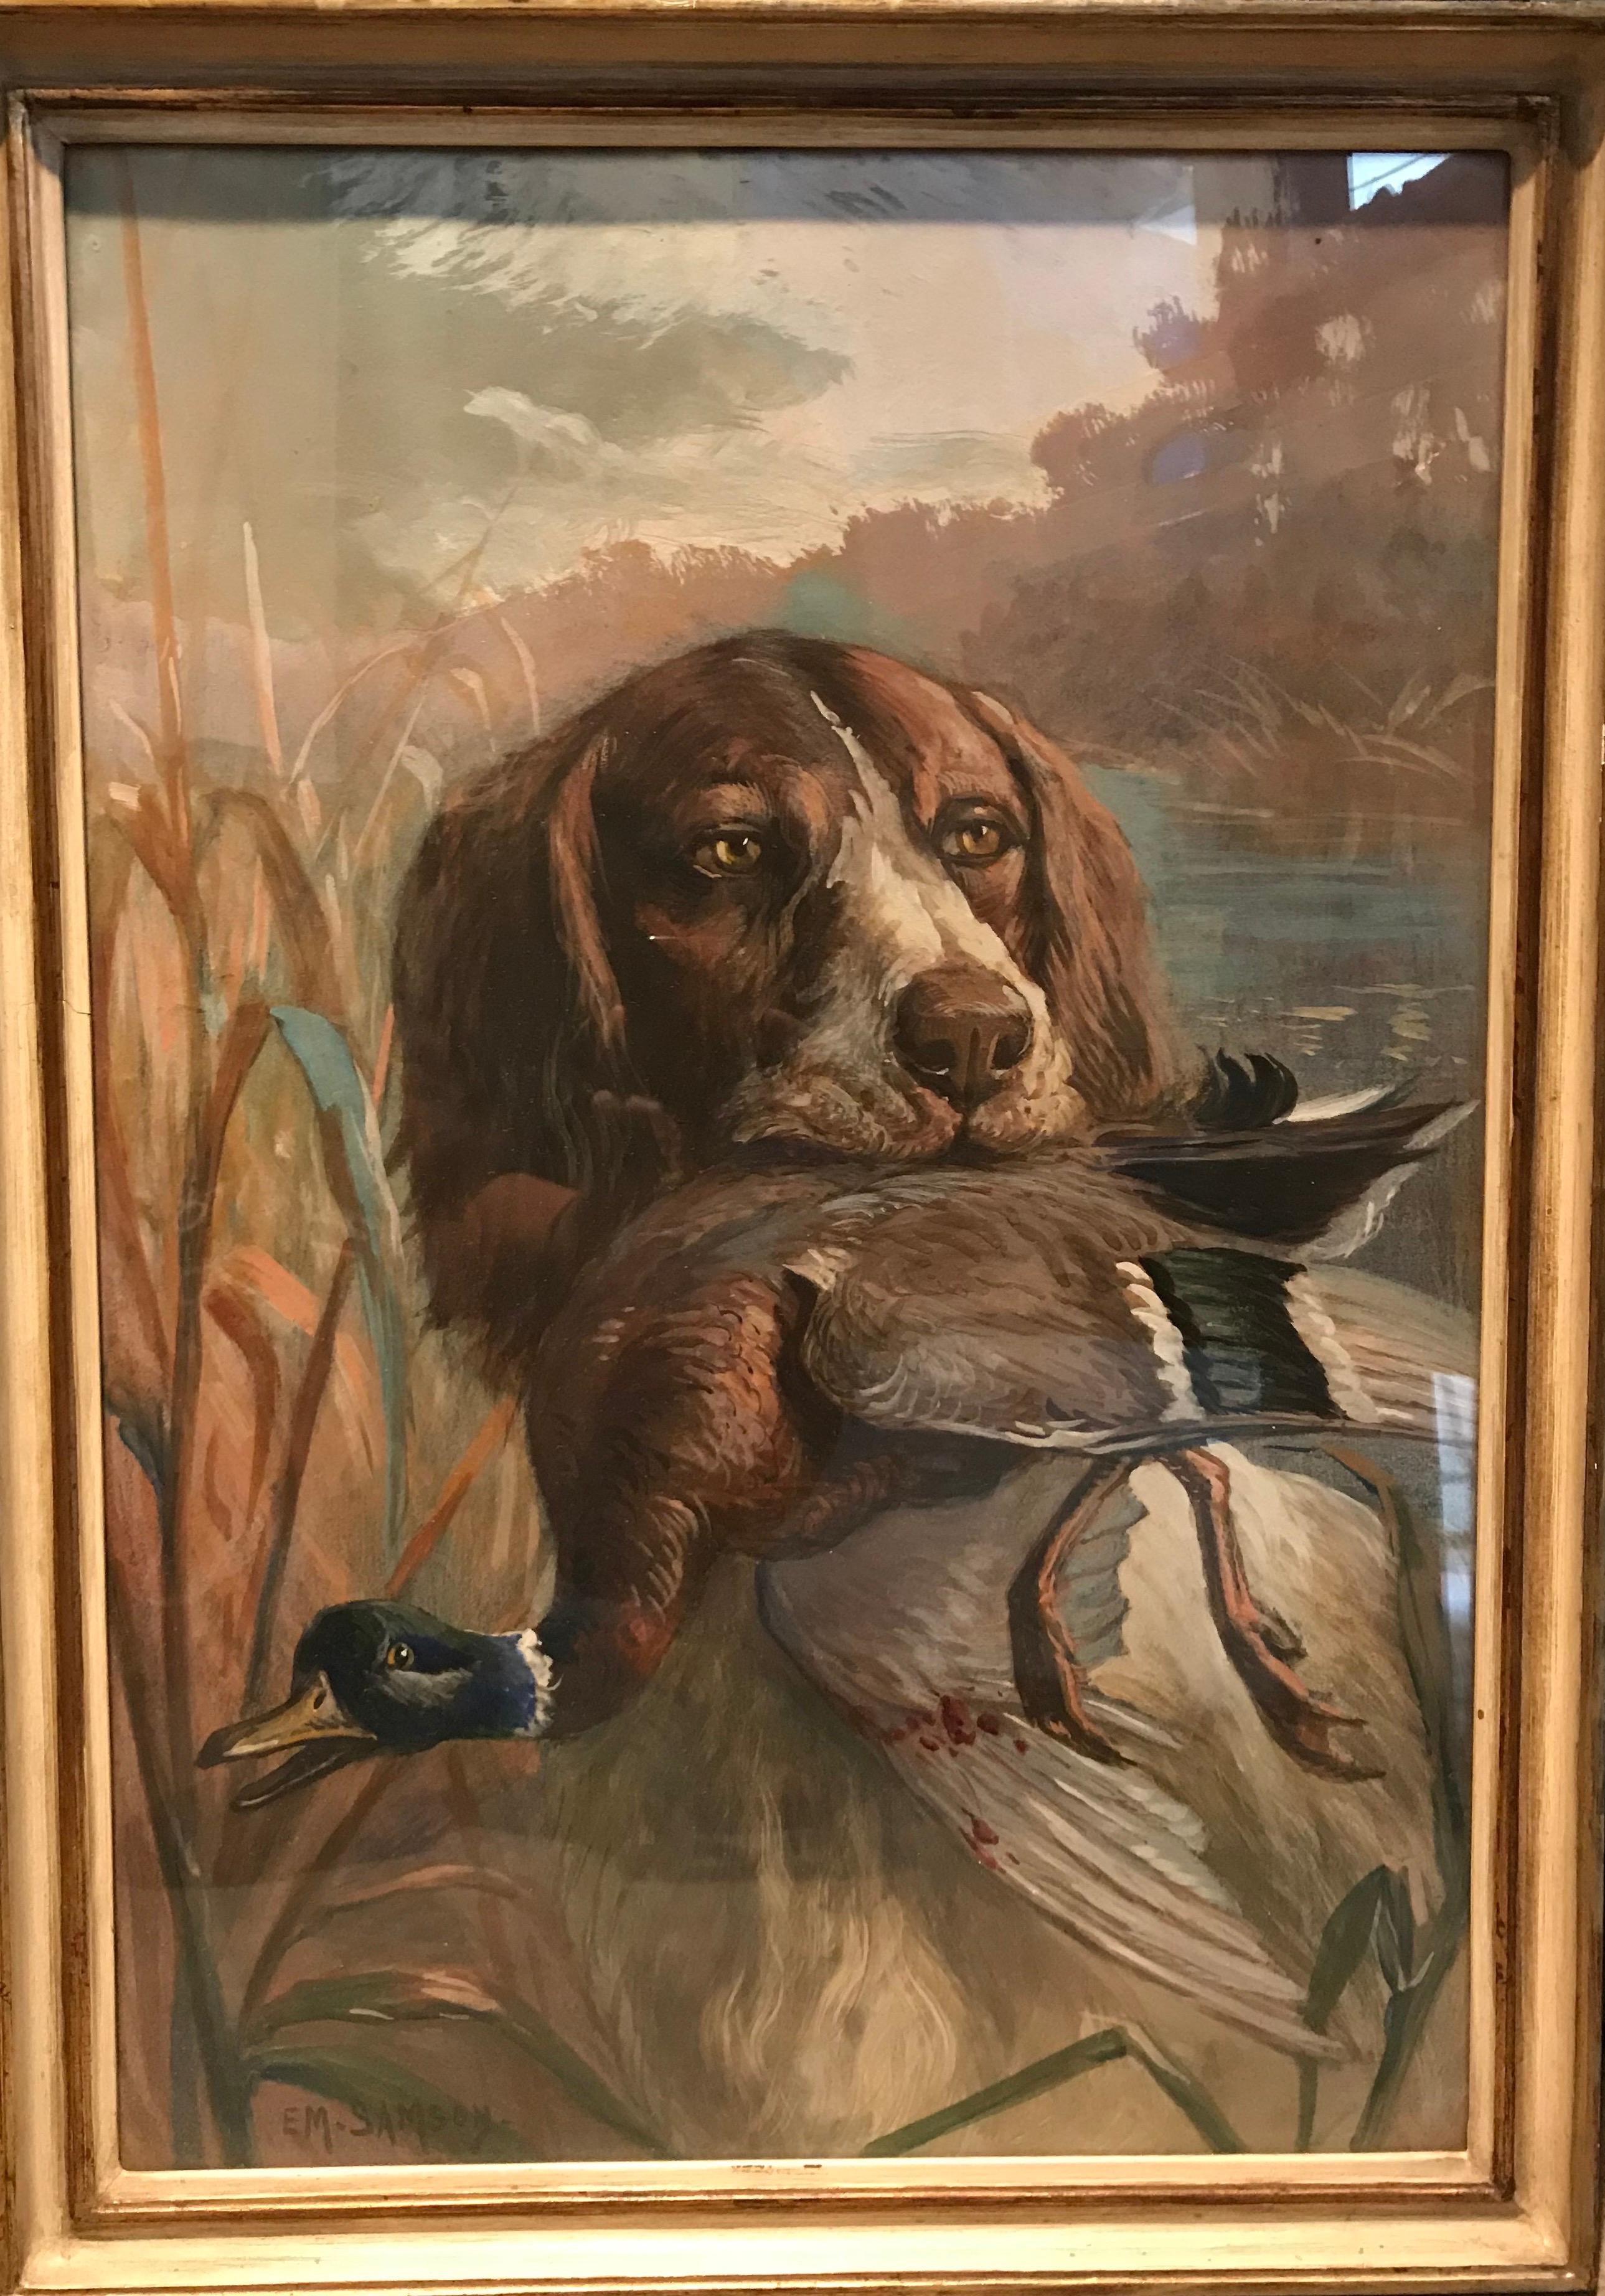 Hunting Dog - Painting by E.M. SAMSON